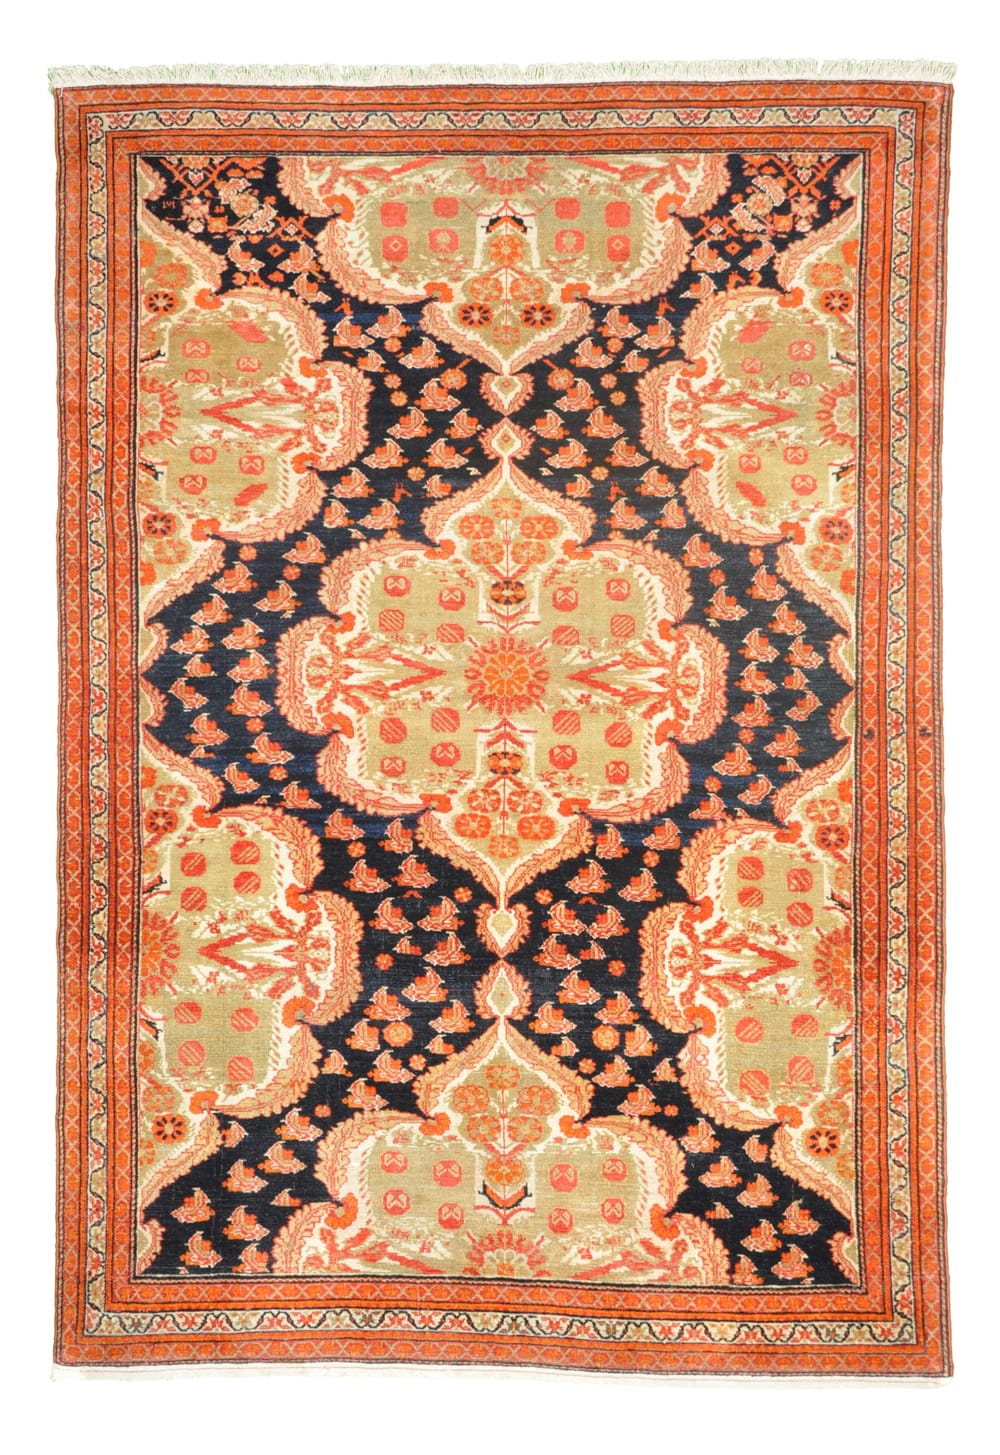 Rug# 41609, antique seneh, Kurdistan, circa 1900, fine wool pile, natural vegetable dyes, immaculate, Persia, size 196x131 cm